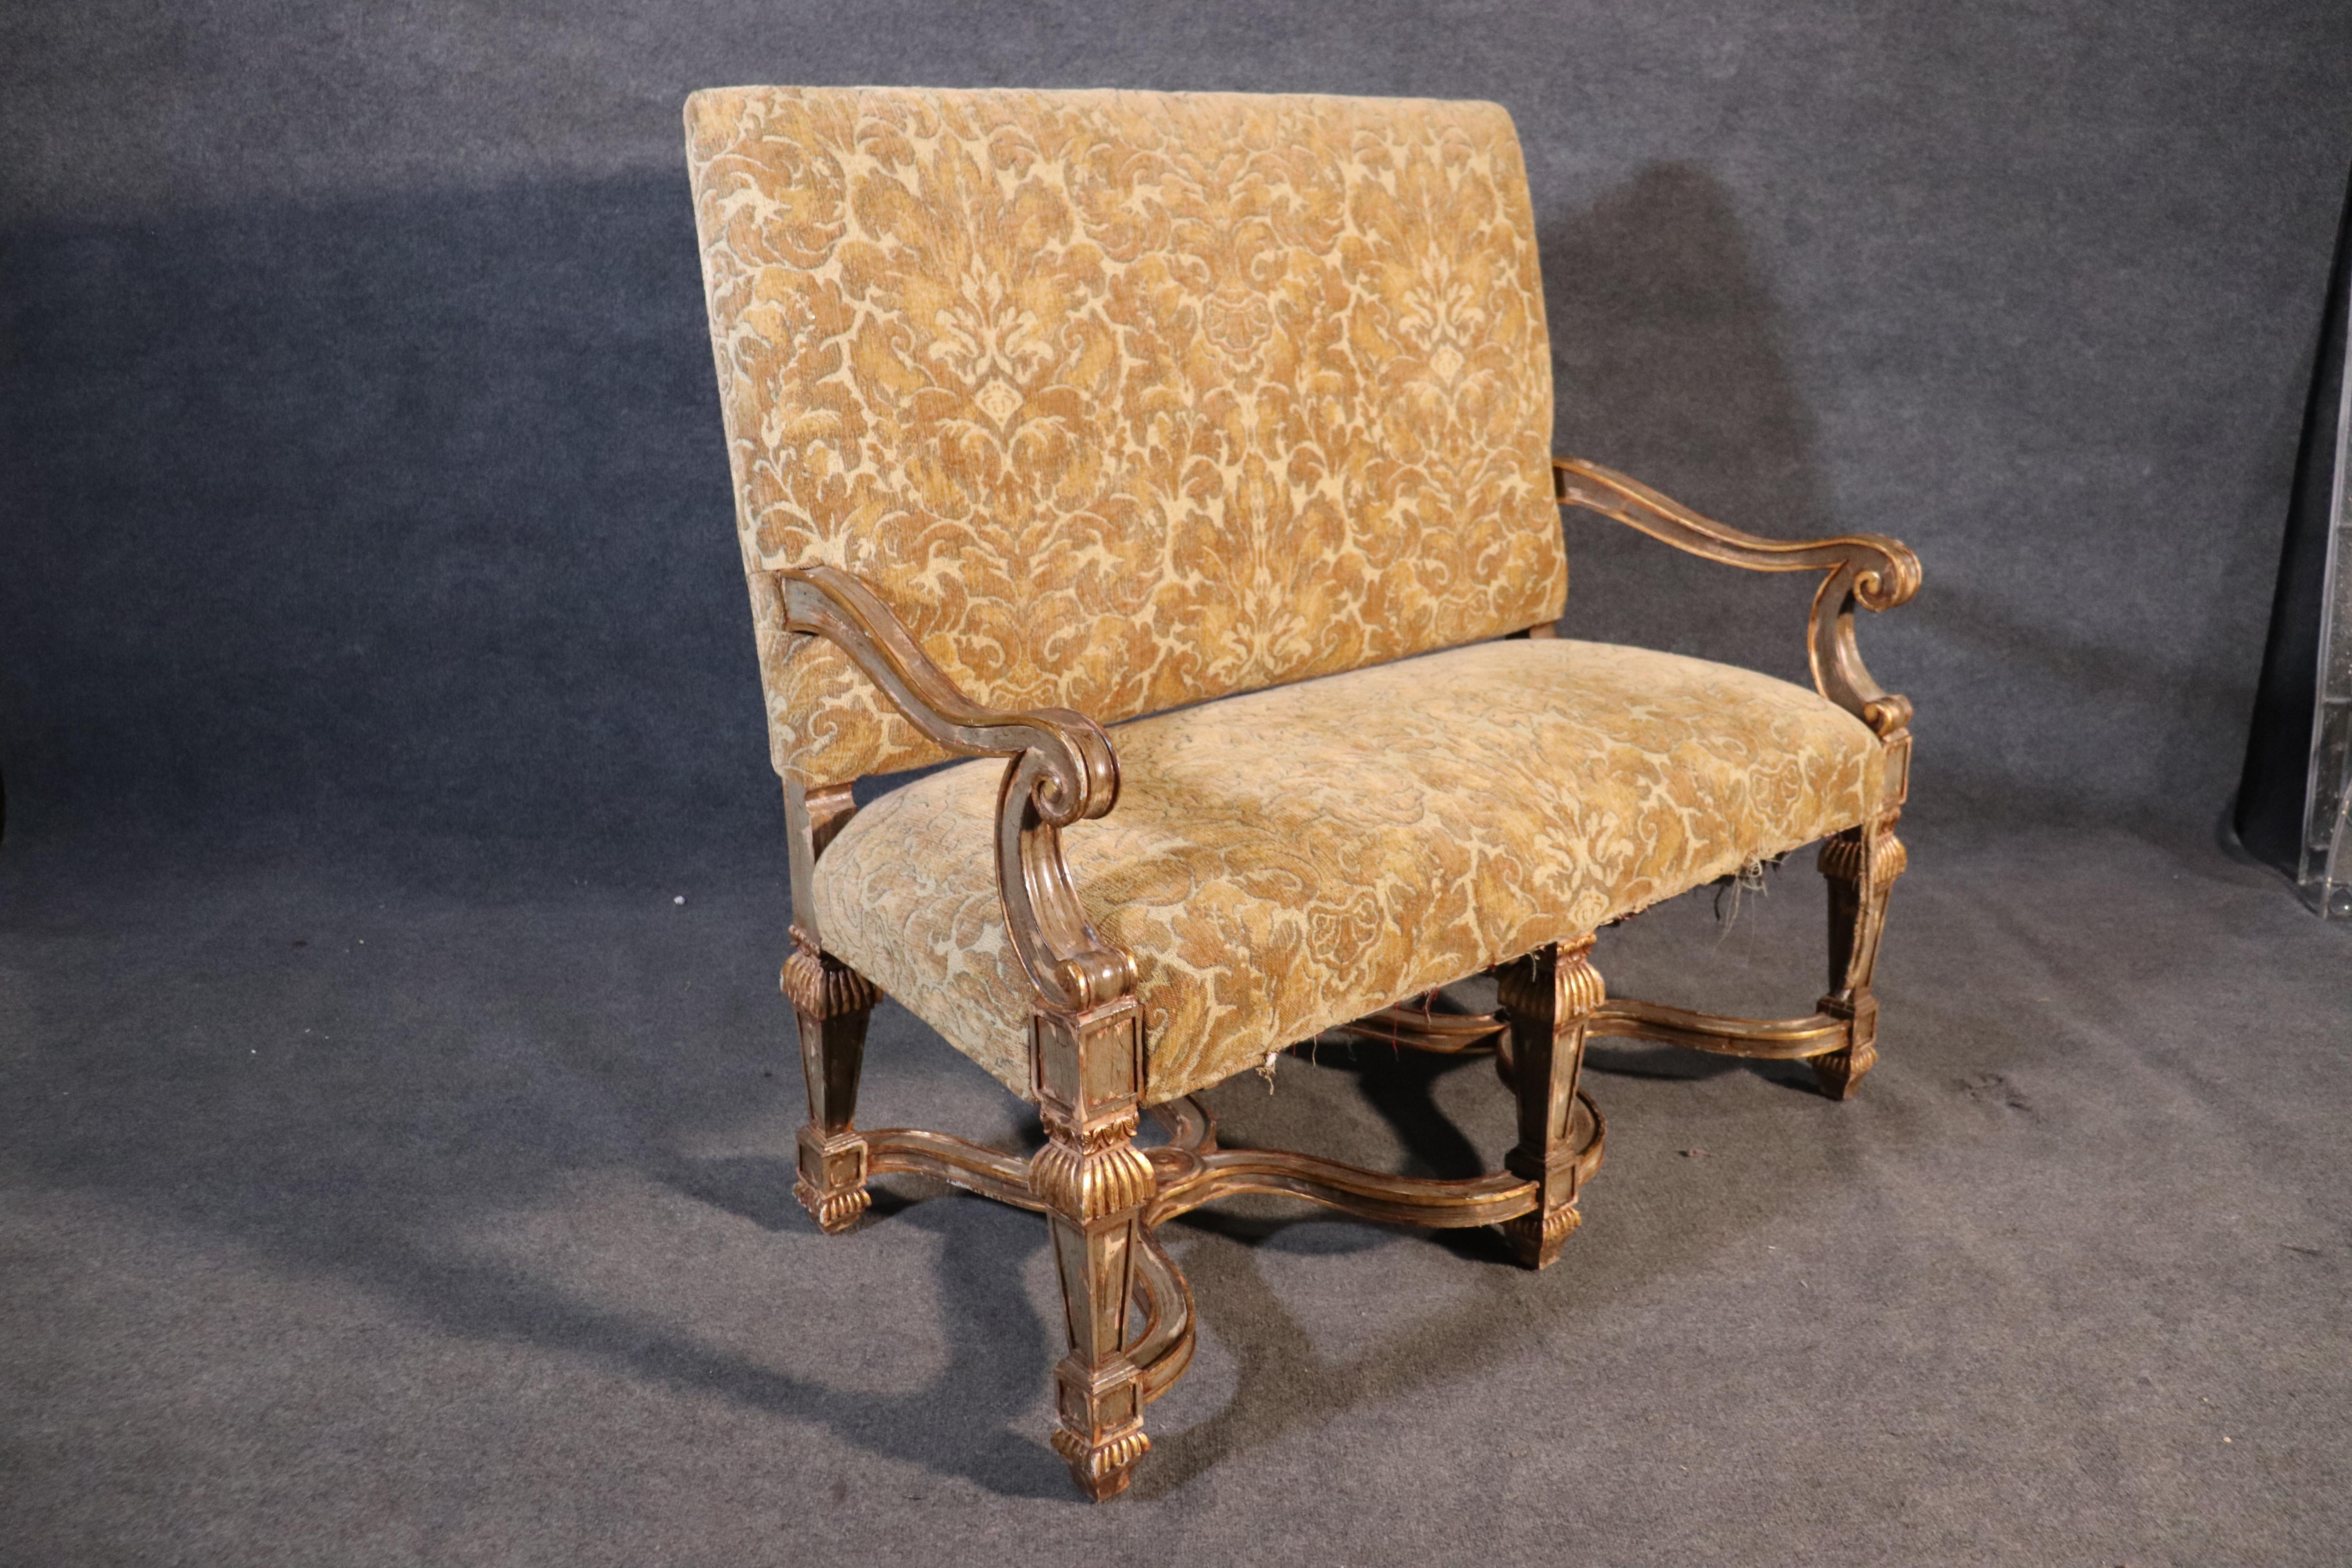 Ok, the upholstery is in need of refreshing...I get that. But the frame is gorgeous! Look at the wonderful paint decorated frame and genuine gold leaf that trims the frame. The upholstery can be redone by your upholsterer and make you happy. There